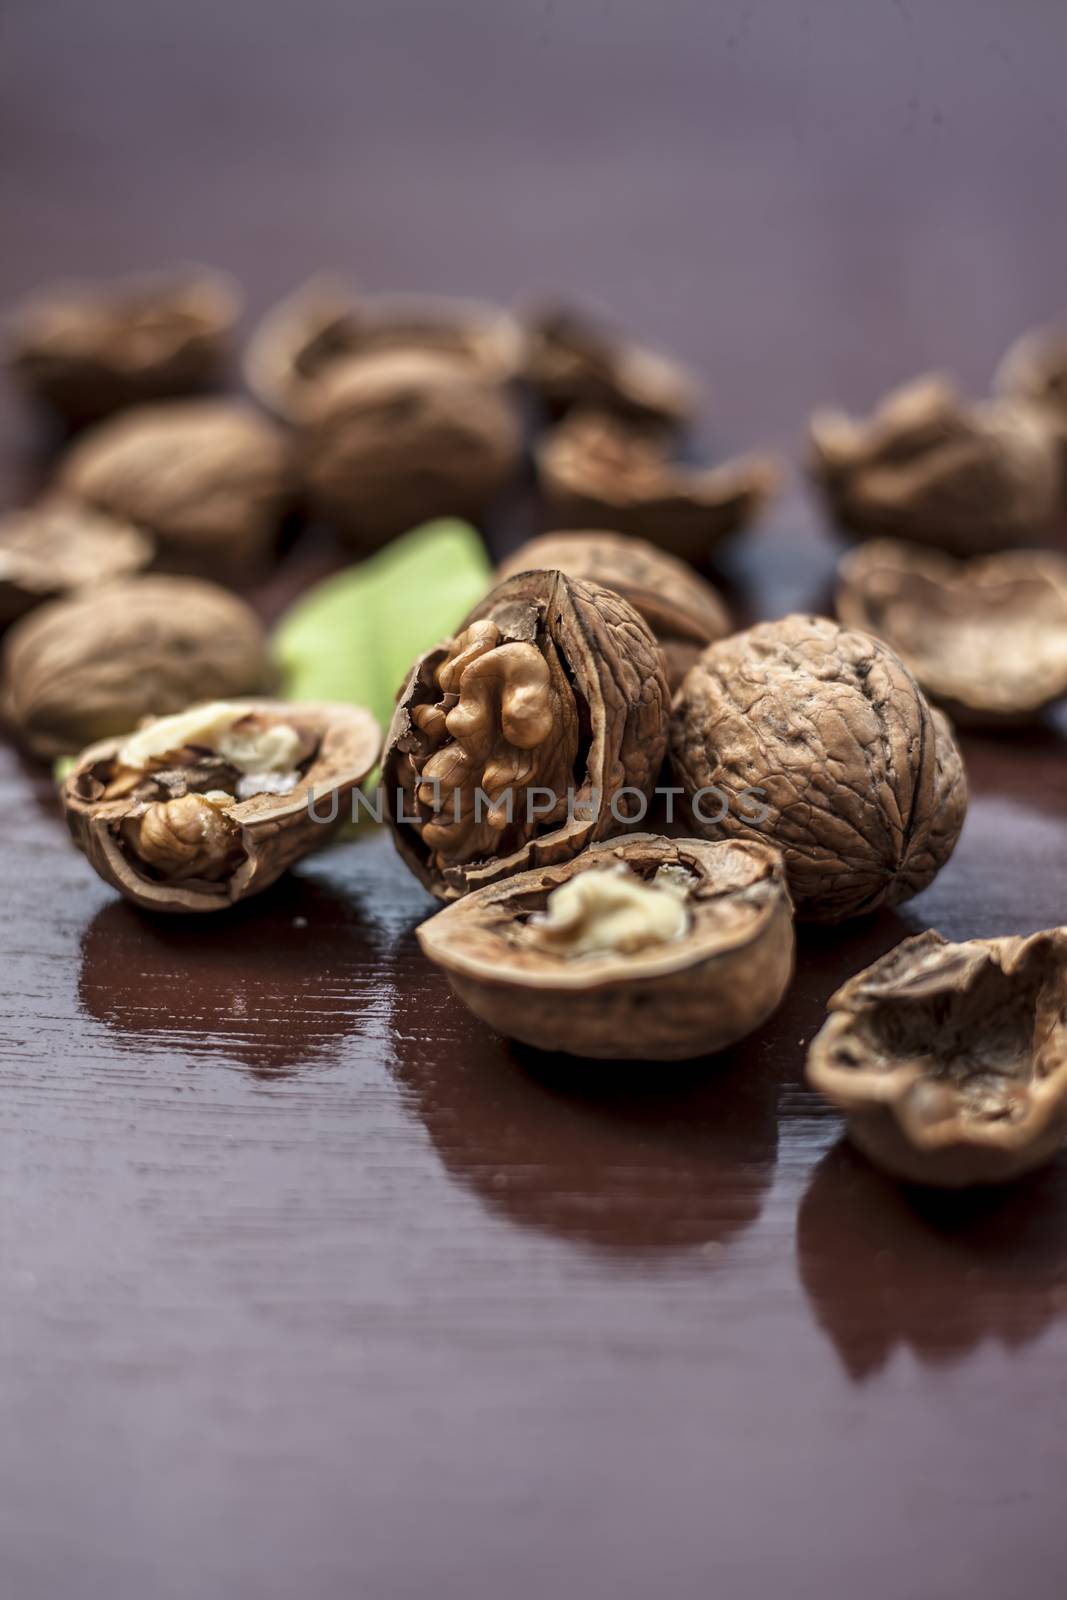 Close up of walnuts in shell and some broken on brown colored wooden surface.